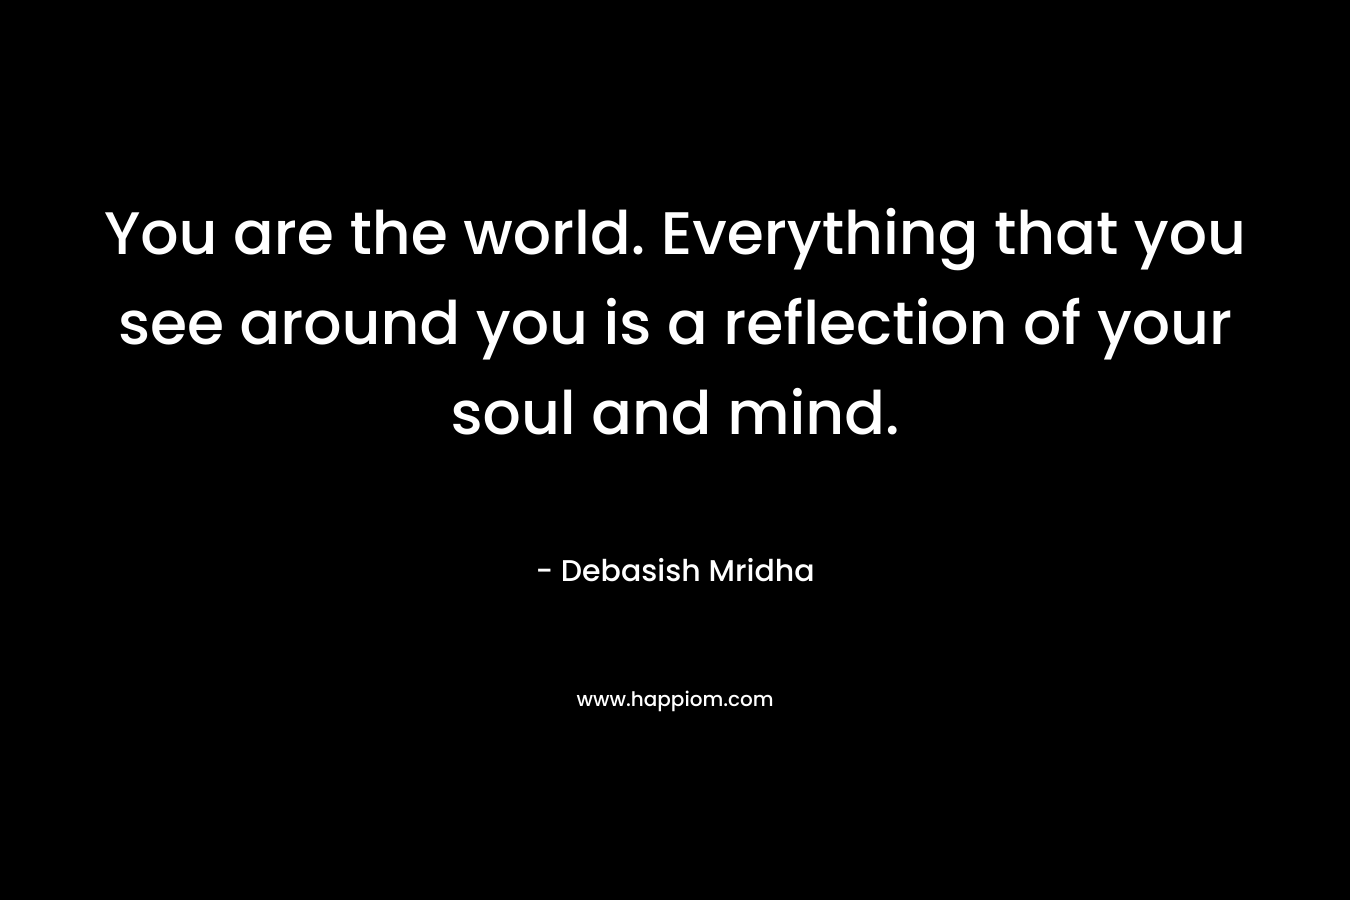 You are the world. Everything that you see around you is a reflection of your soul and mind.